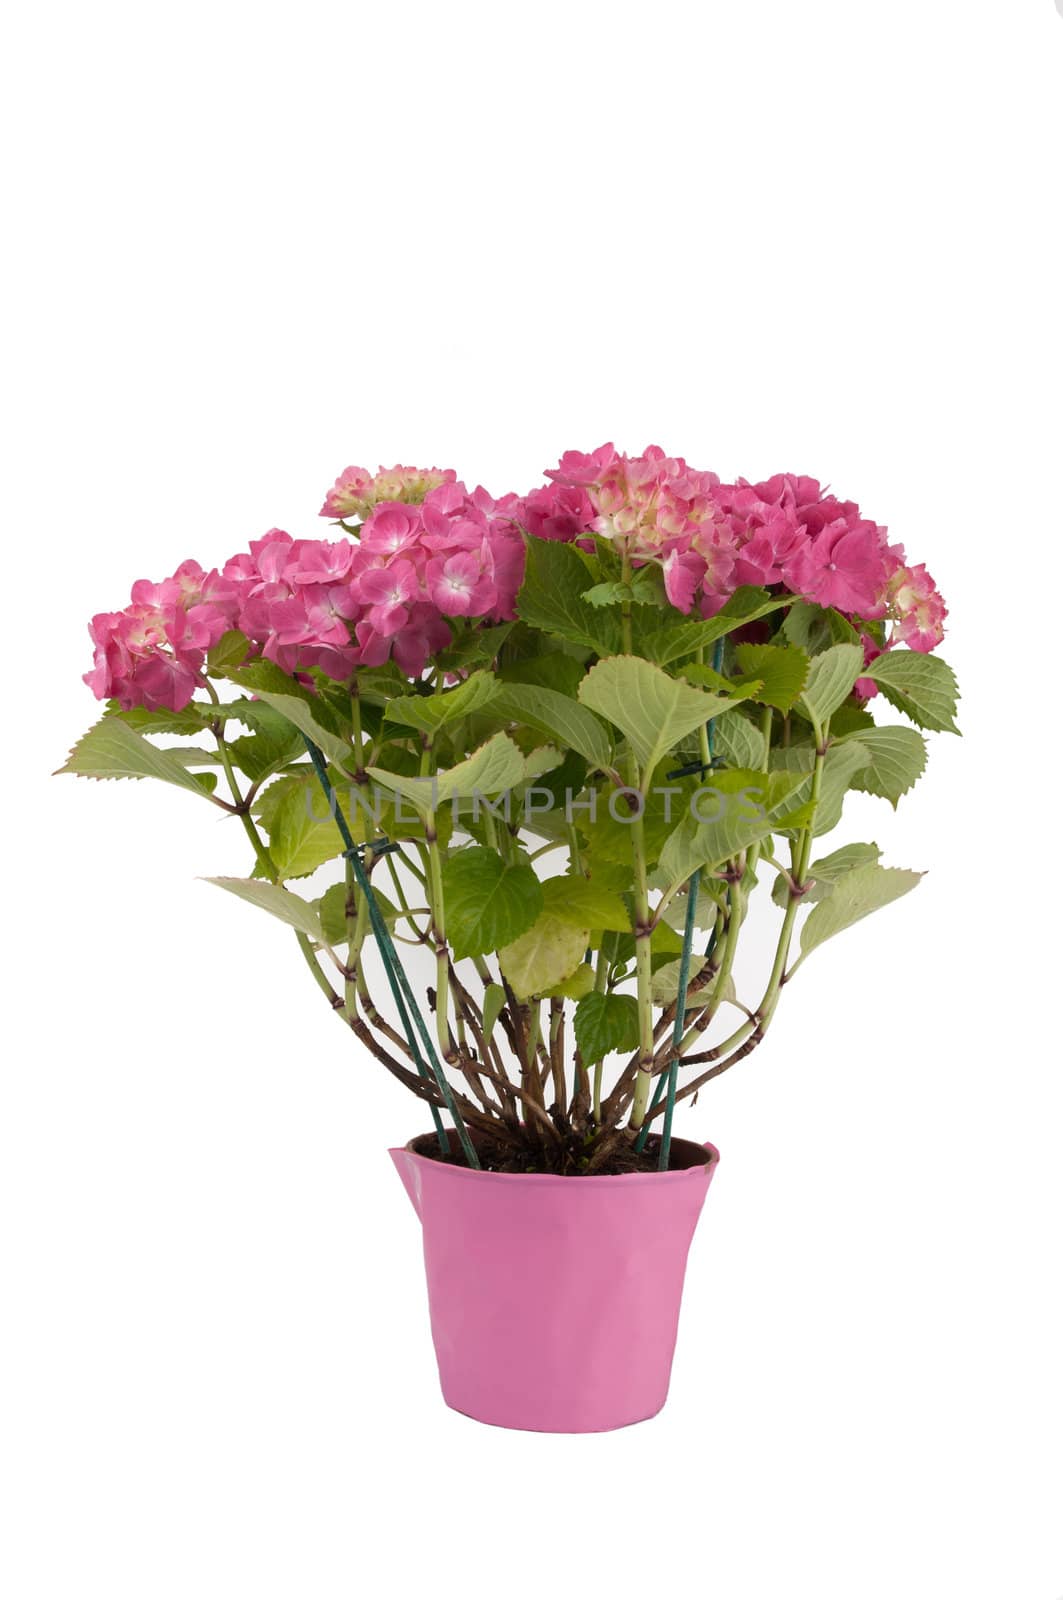 hydrangea flowers with a pink pot by bigmagic